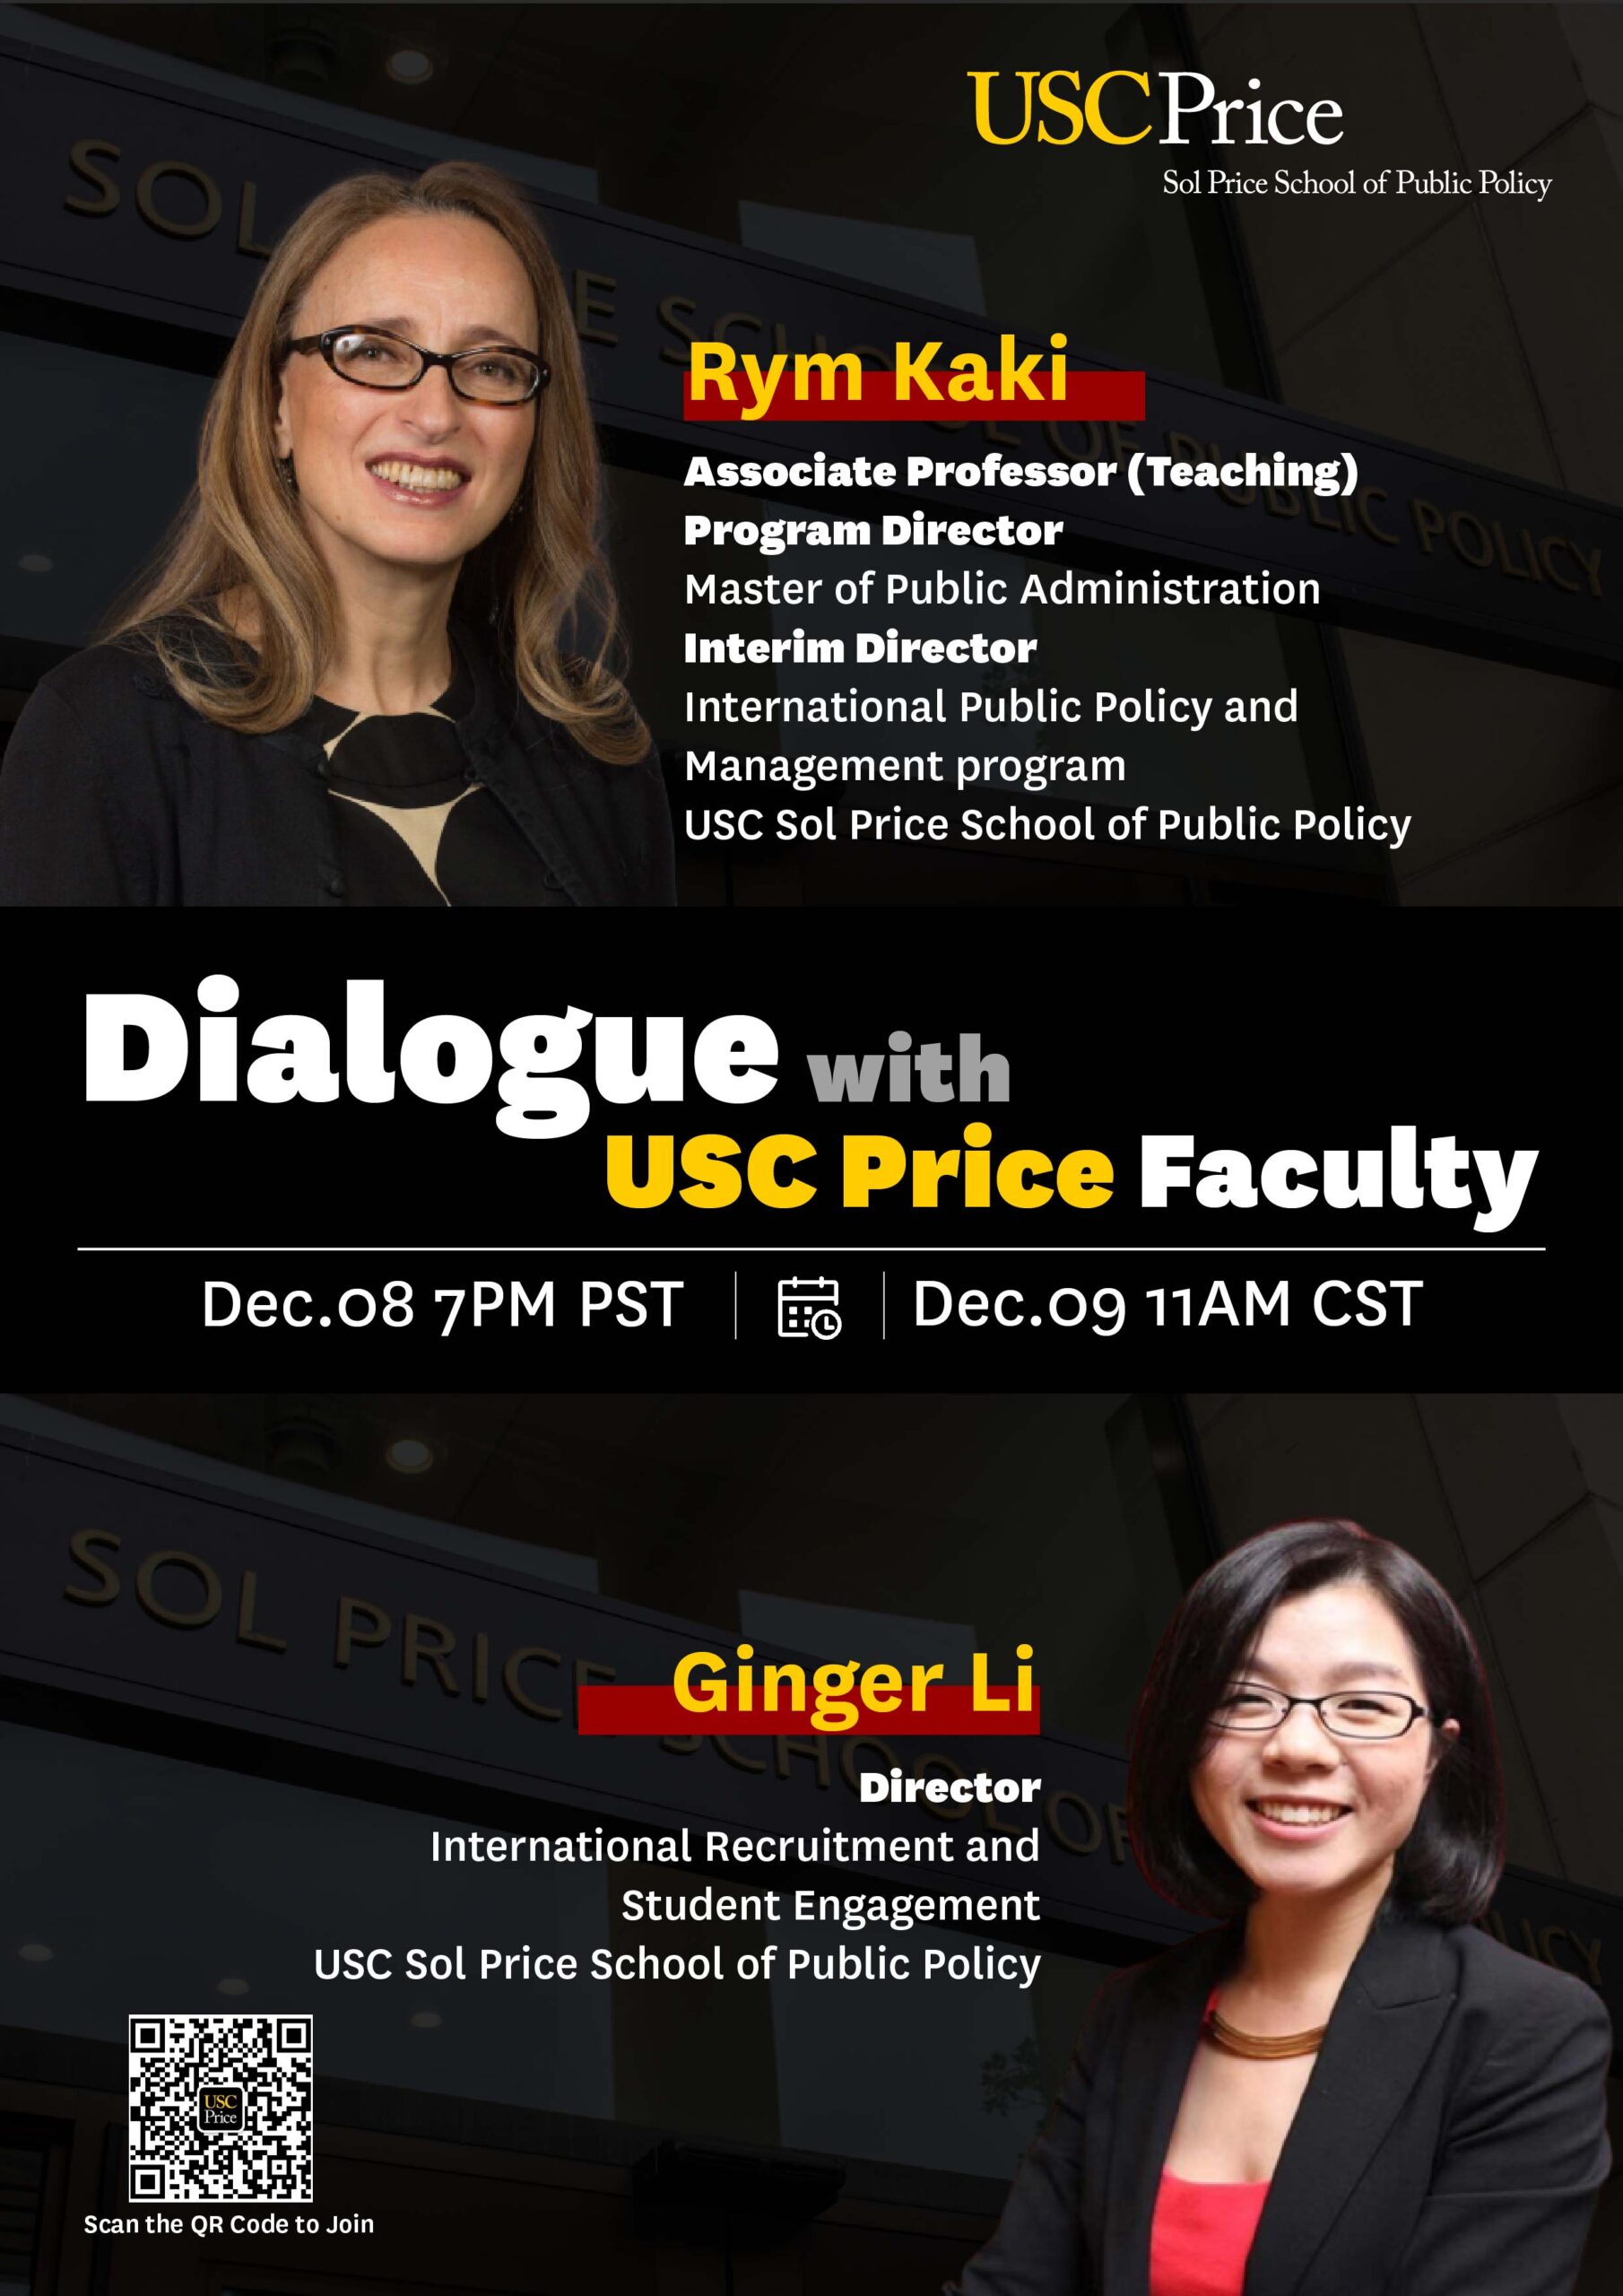 Dialogue with USC Price Faculty